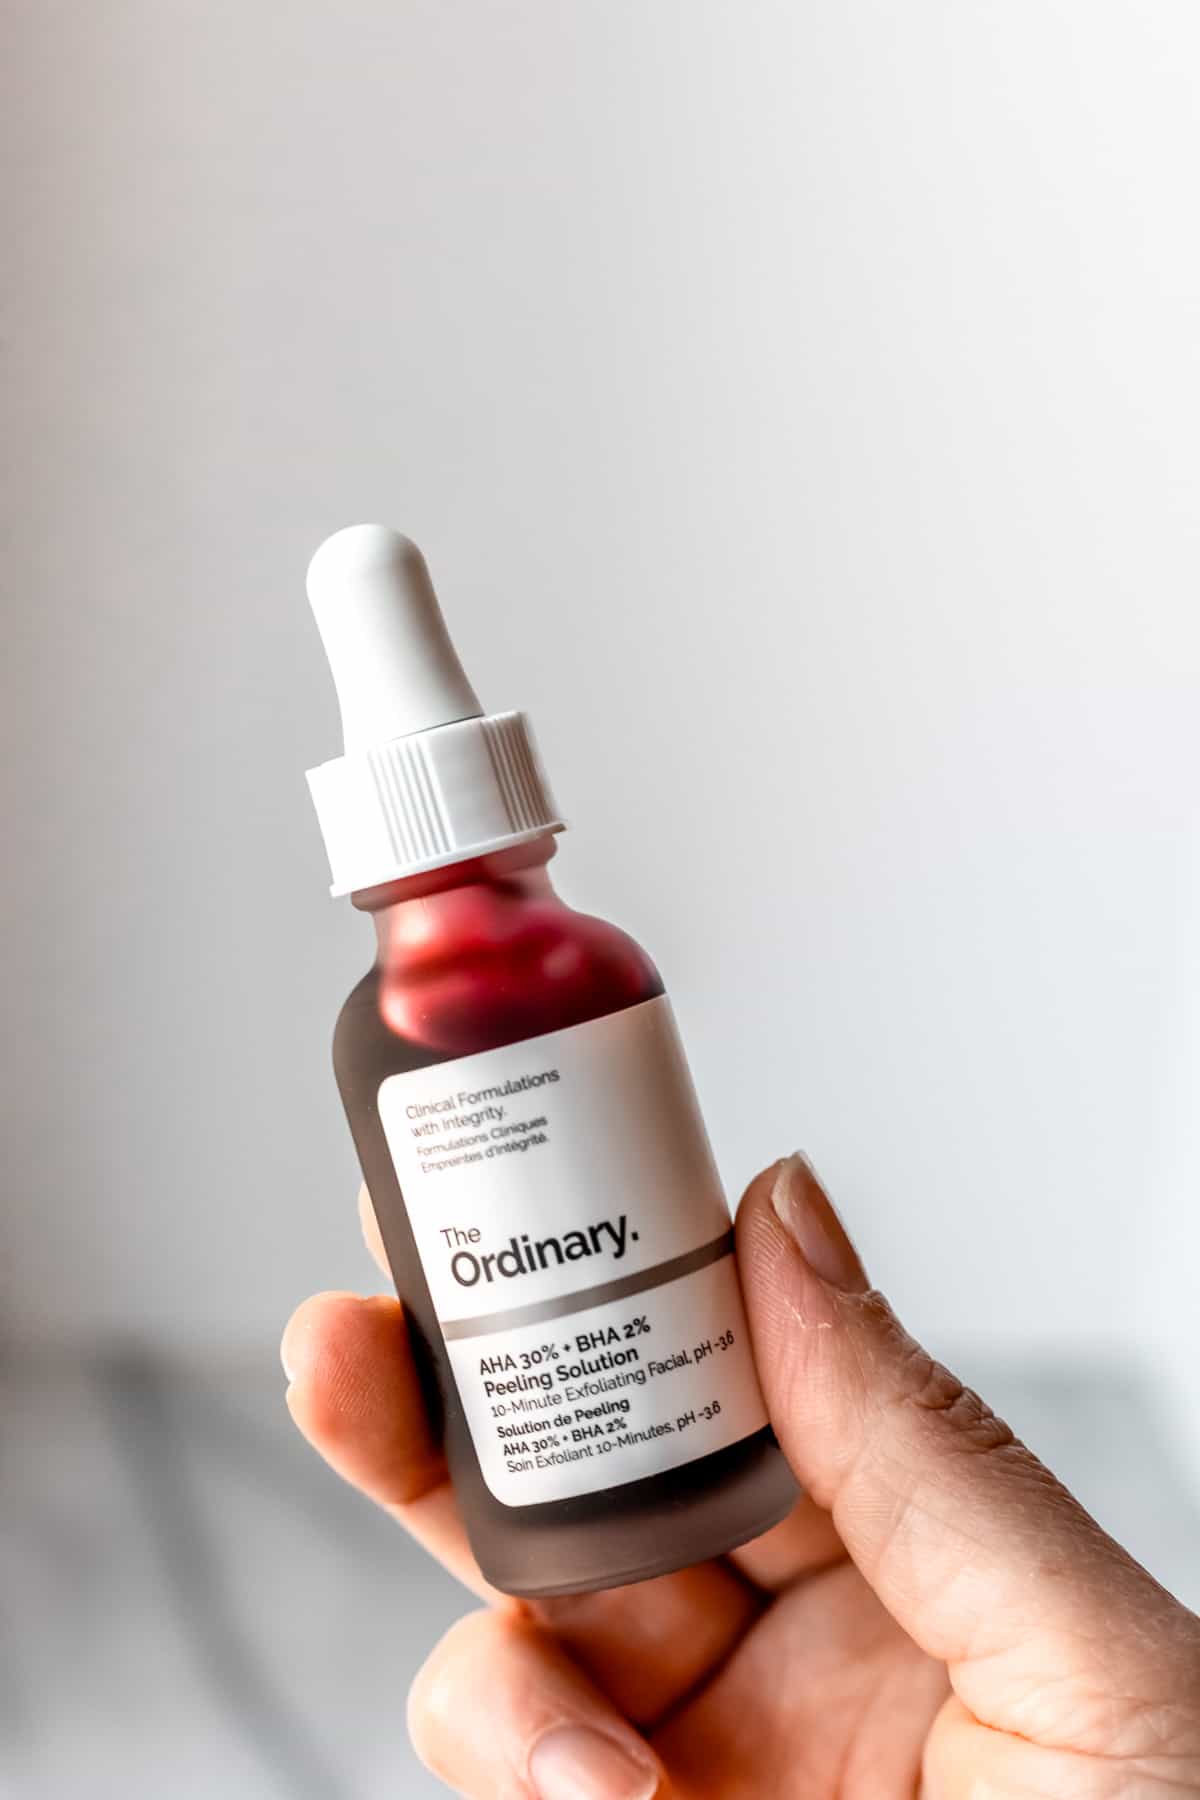 A hand holding up a bottle of The Ordinary Peeling Solution in front of a light background.